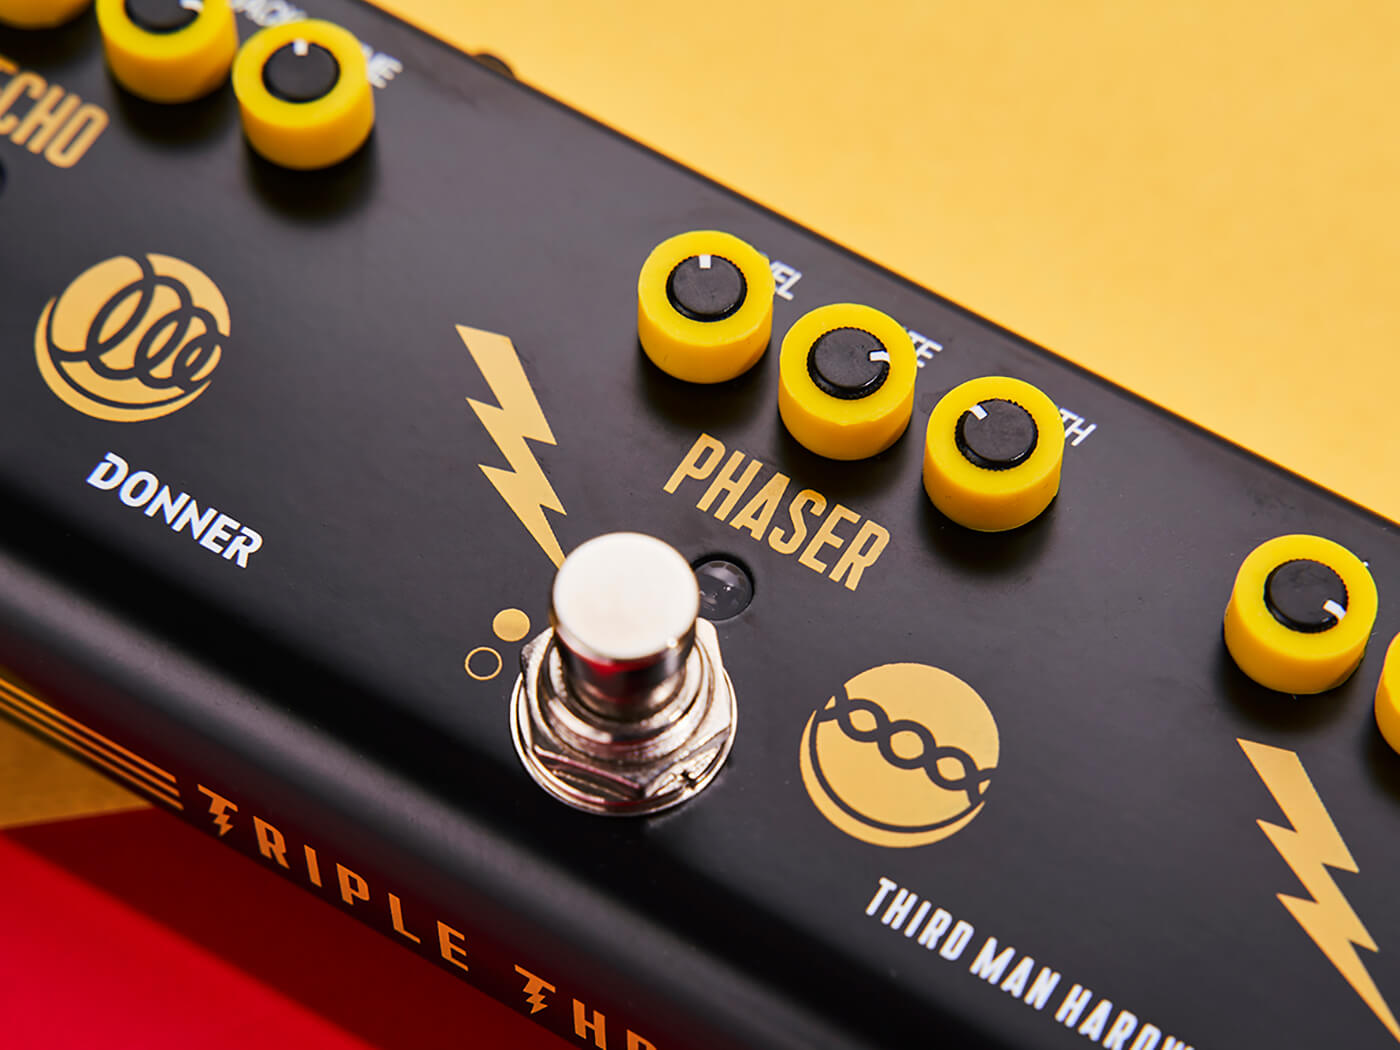 Donner Triple Threat phaser, photo by Adam Gasson